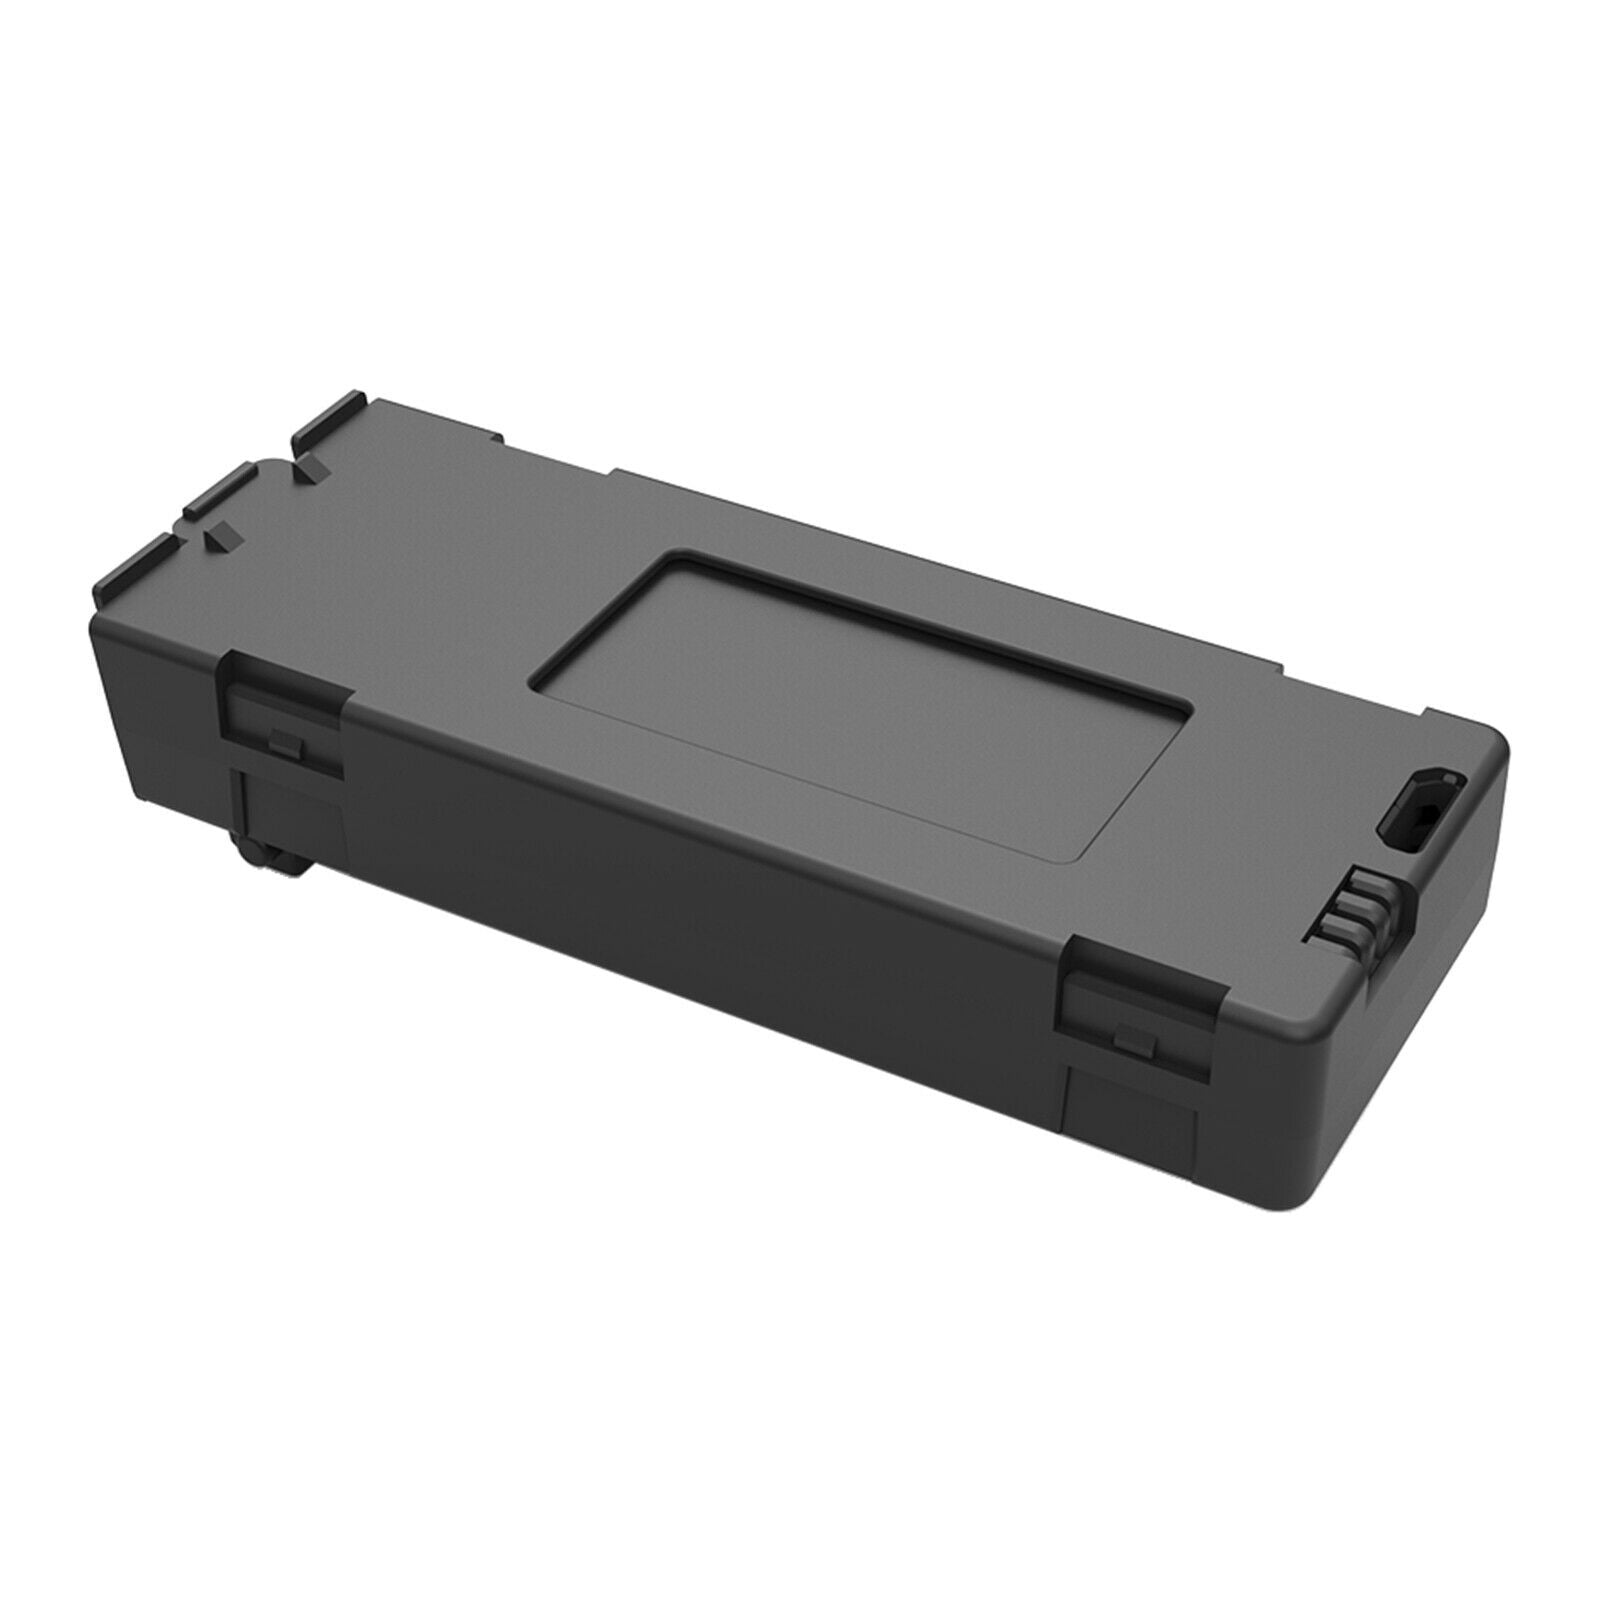 Remote Control UAV Battery Replaces Parts Easy to Repalce Black fits for E525